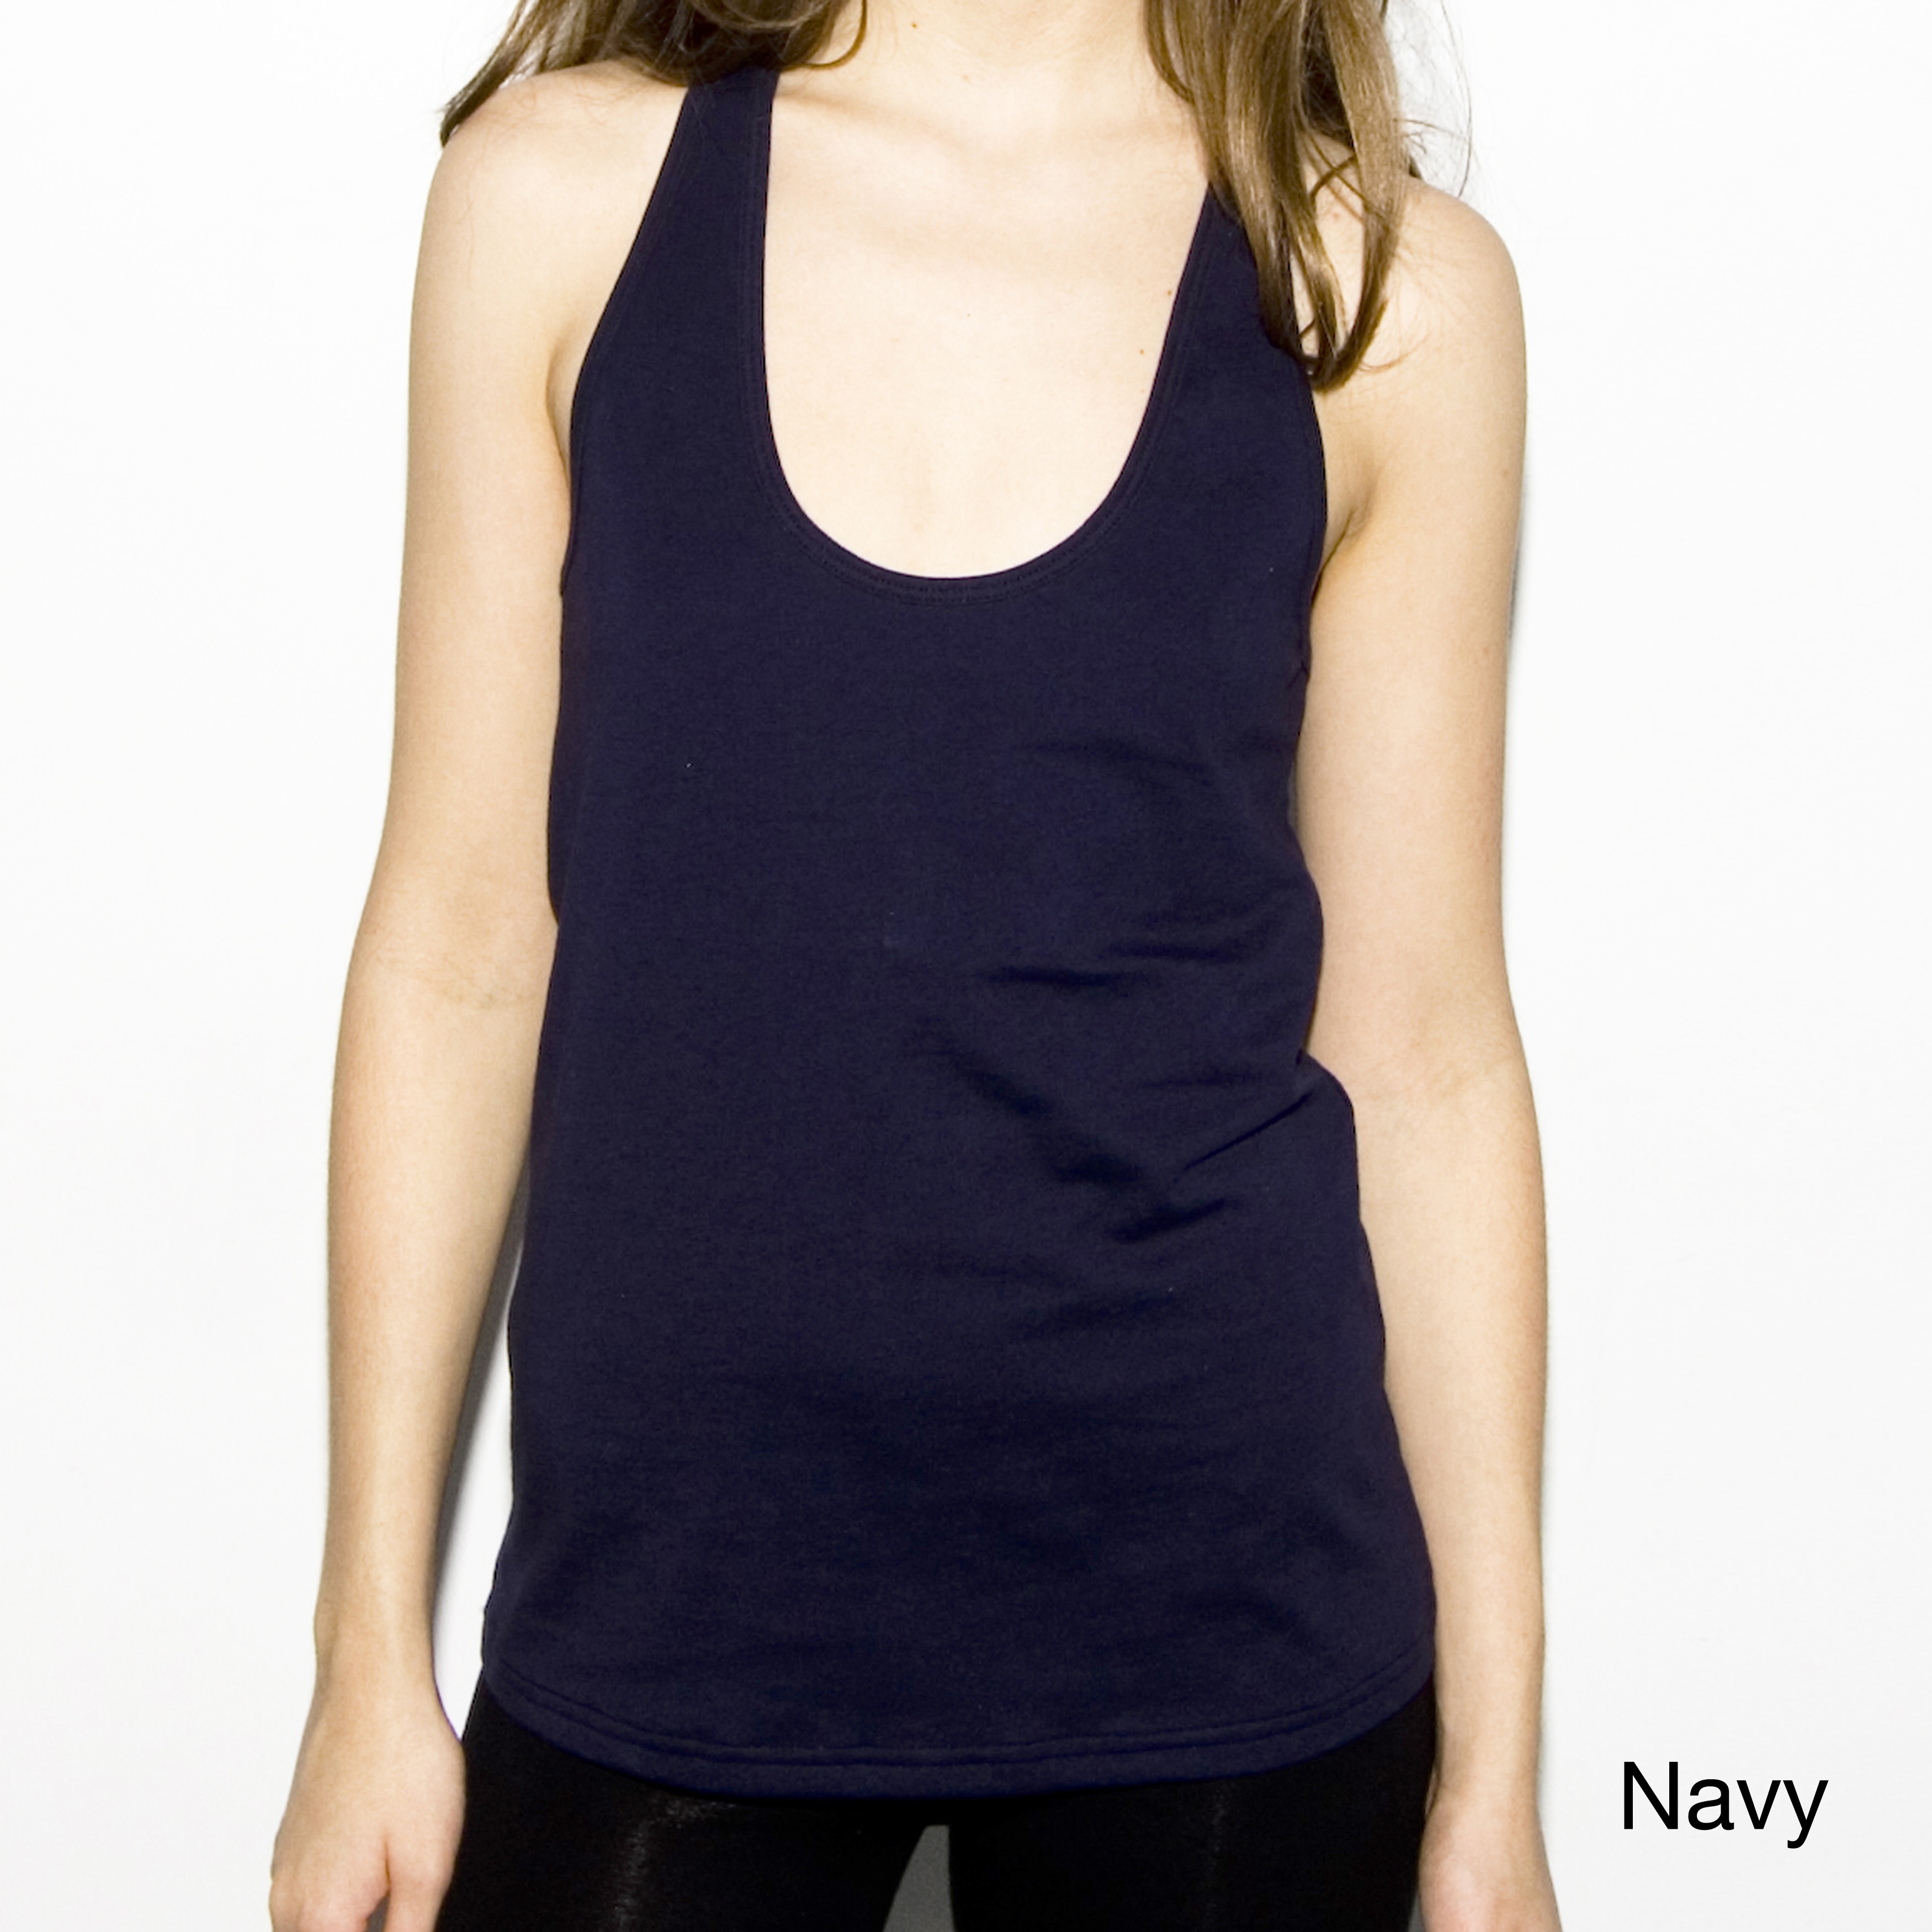 American Apparel American Apparel Womens Navy Jersey Racer Back Tank Top (xs Only) Navy Size XS (2  3)